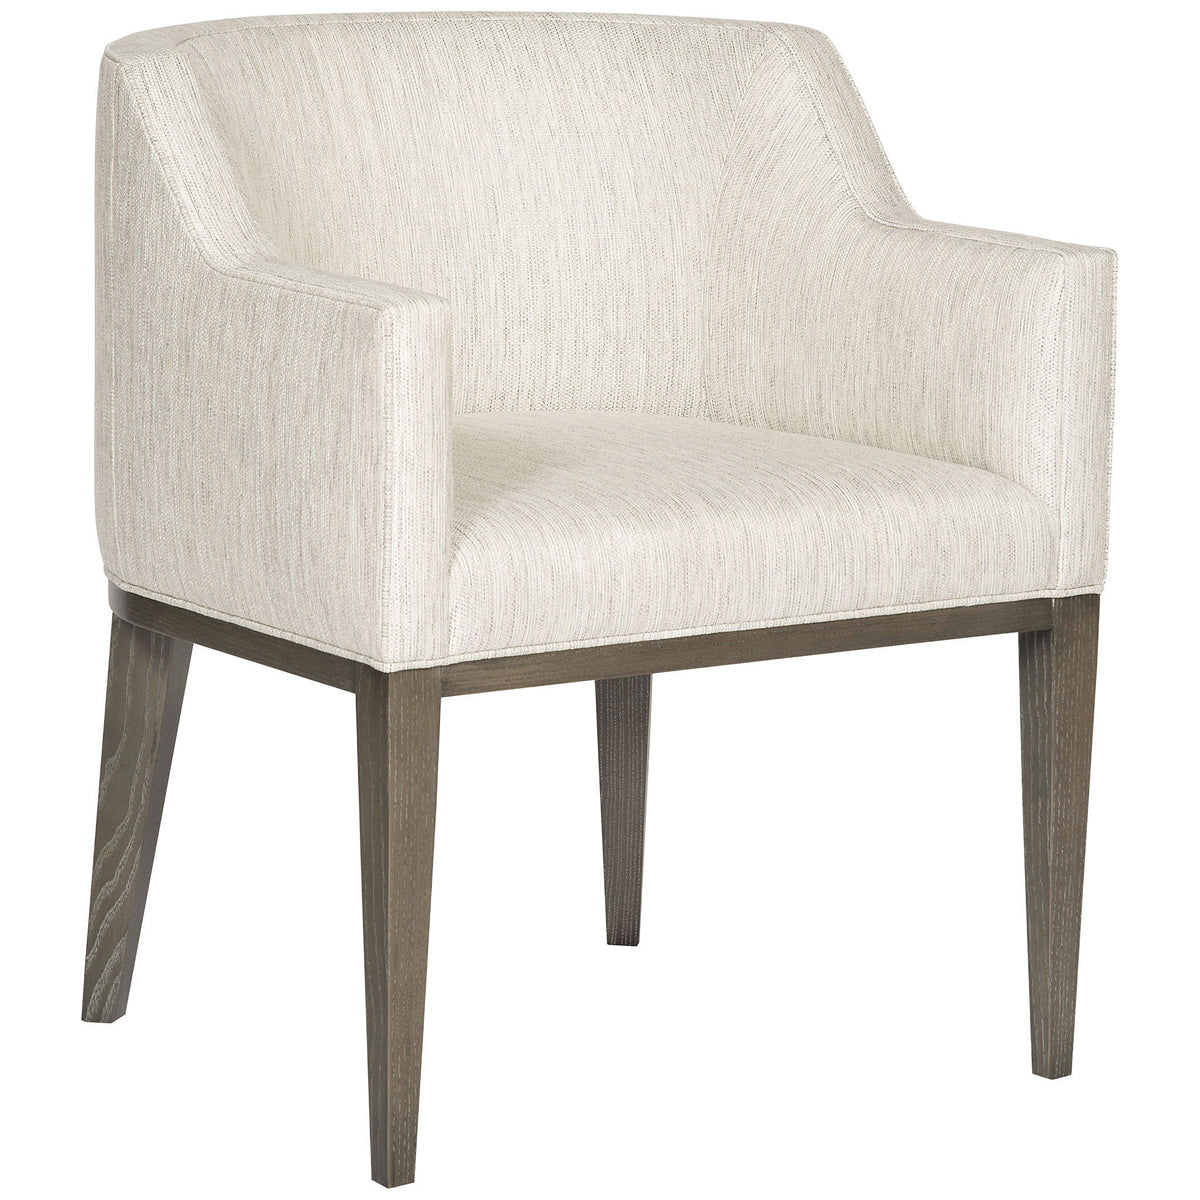 Vanguard Furniture Axis Stocked Performance Dining Arm Chair